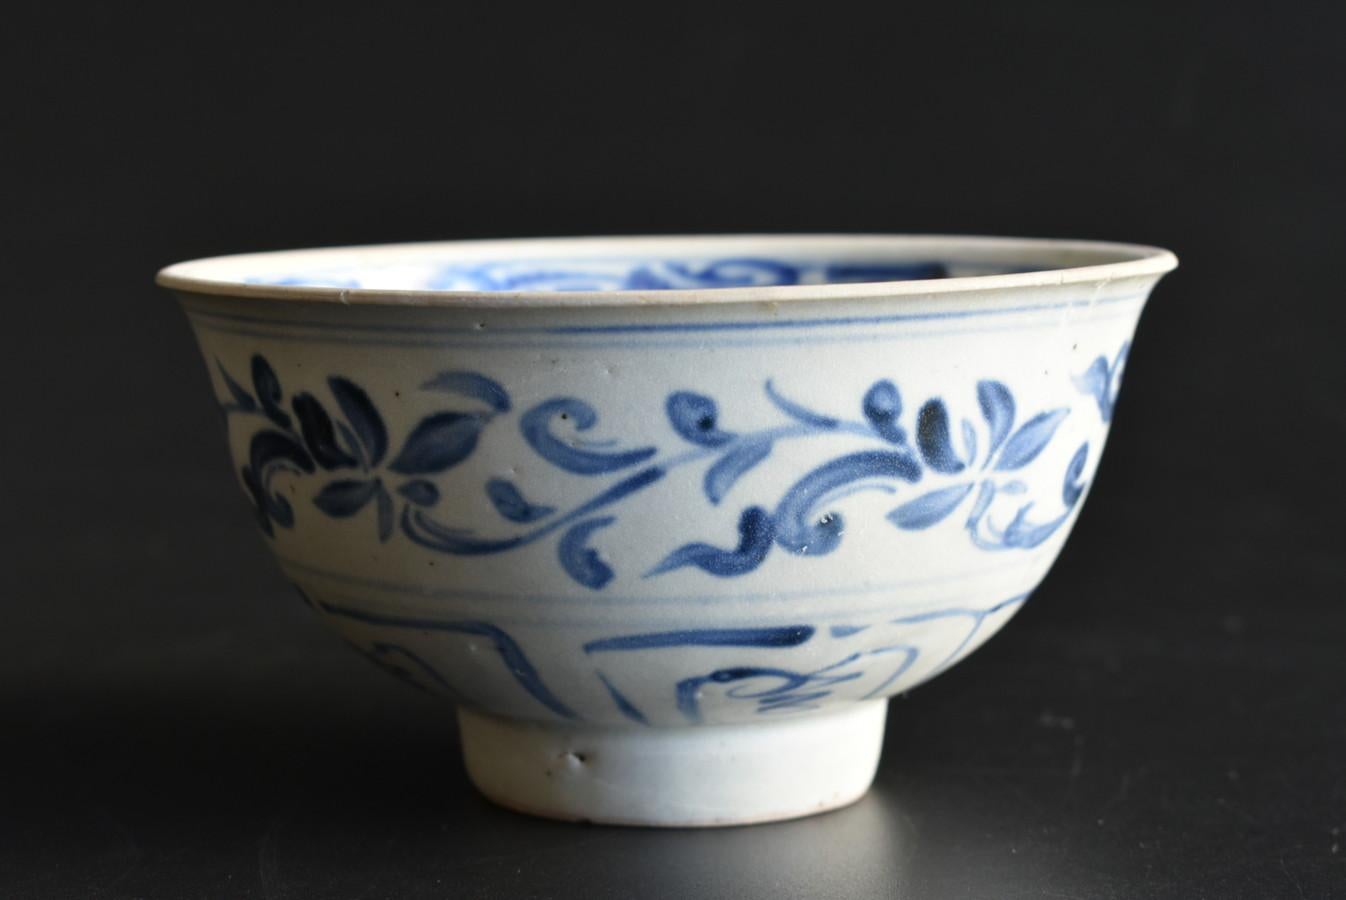 A bowl made around the 16th century in Vietnam.
In Japan, trade with Vietnam has been active since the Muromachi period (around the 16th century).
Many Vietnamese bowls have also been imported into Japan.
Vietnamese bowls are greatly influenced by